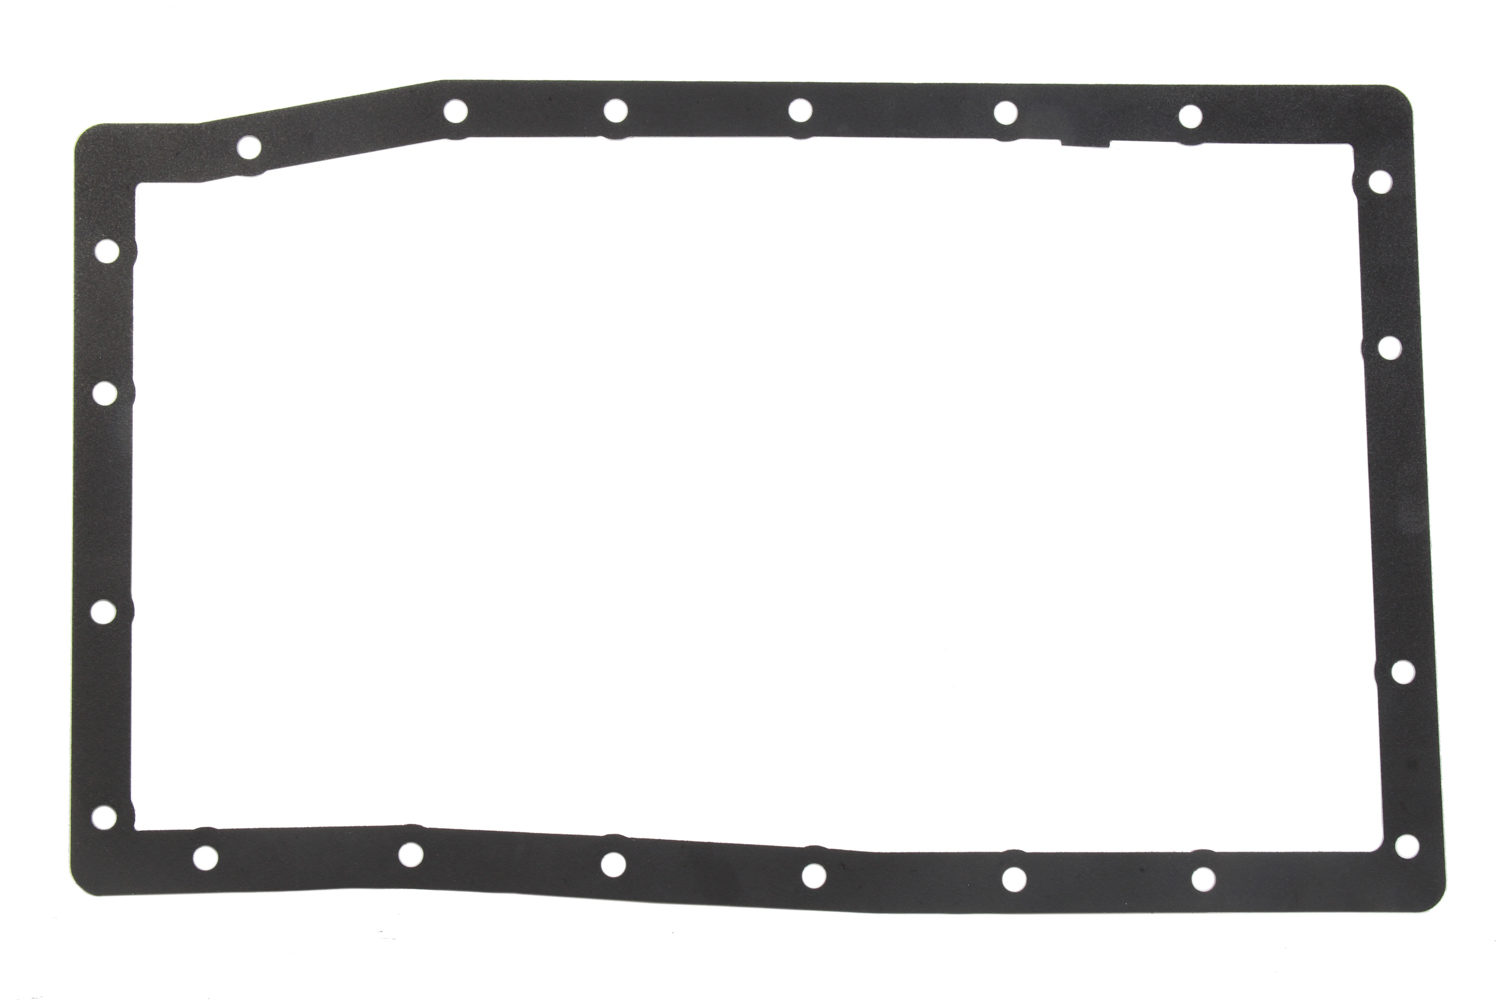 Cometic Gaskets C14122-060 Transmission Pan Gasket, 0.060 in Thick, Rubber Coated Aluminum, Toyota A750X / A760X Transmission, Each